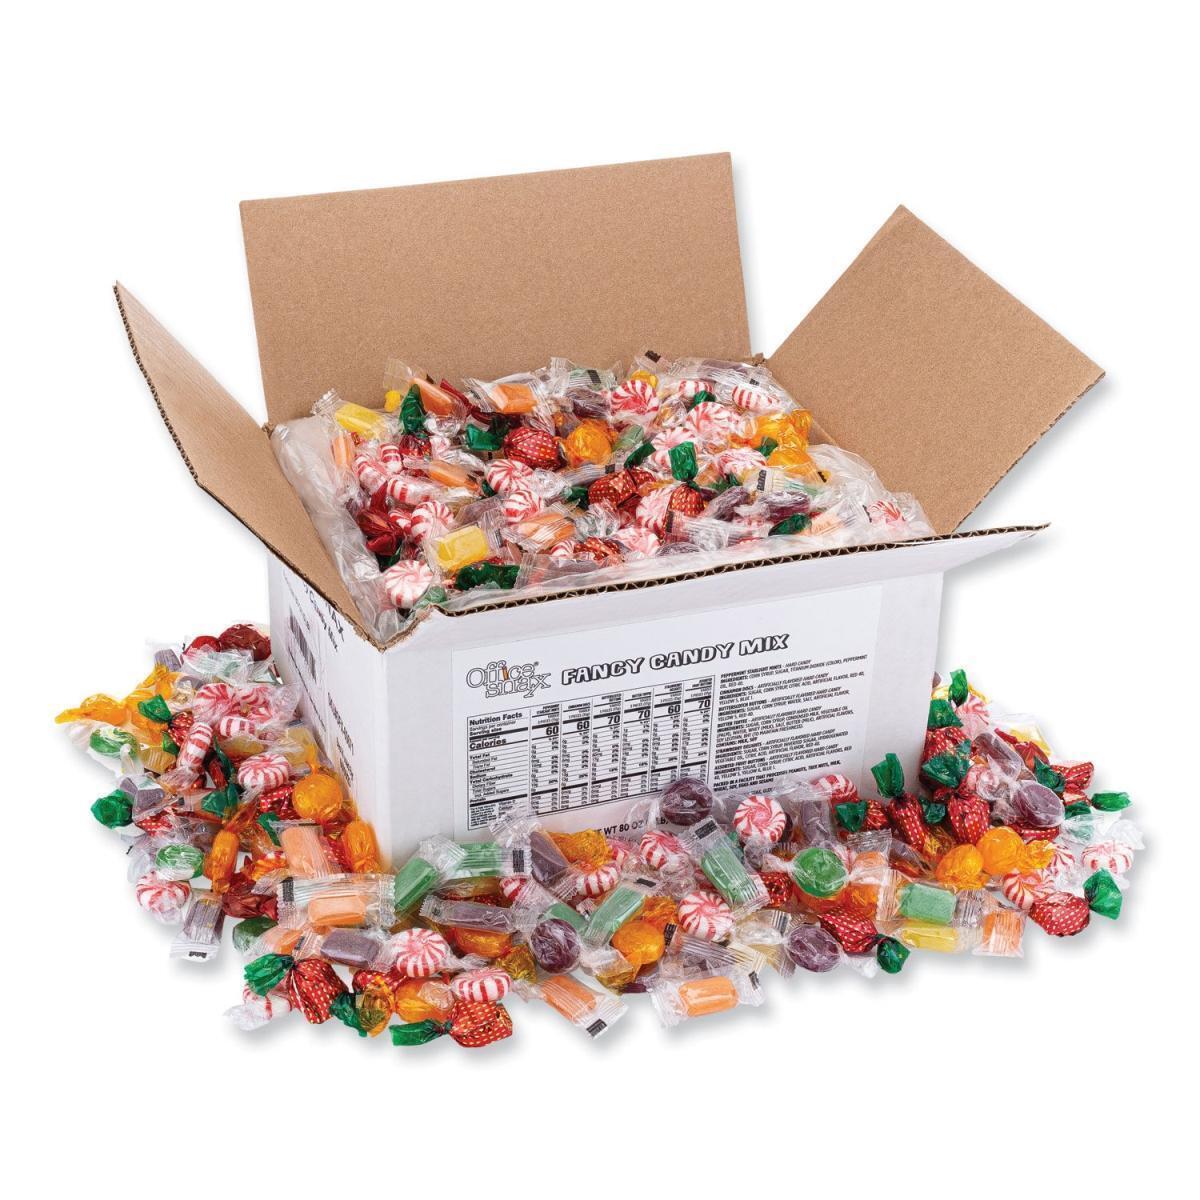 Office Snax OFX00671 Fancy Candy Mix - 5 lbs